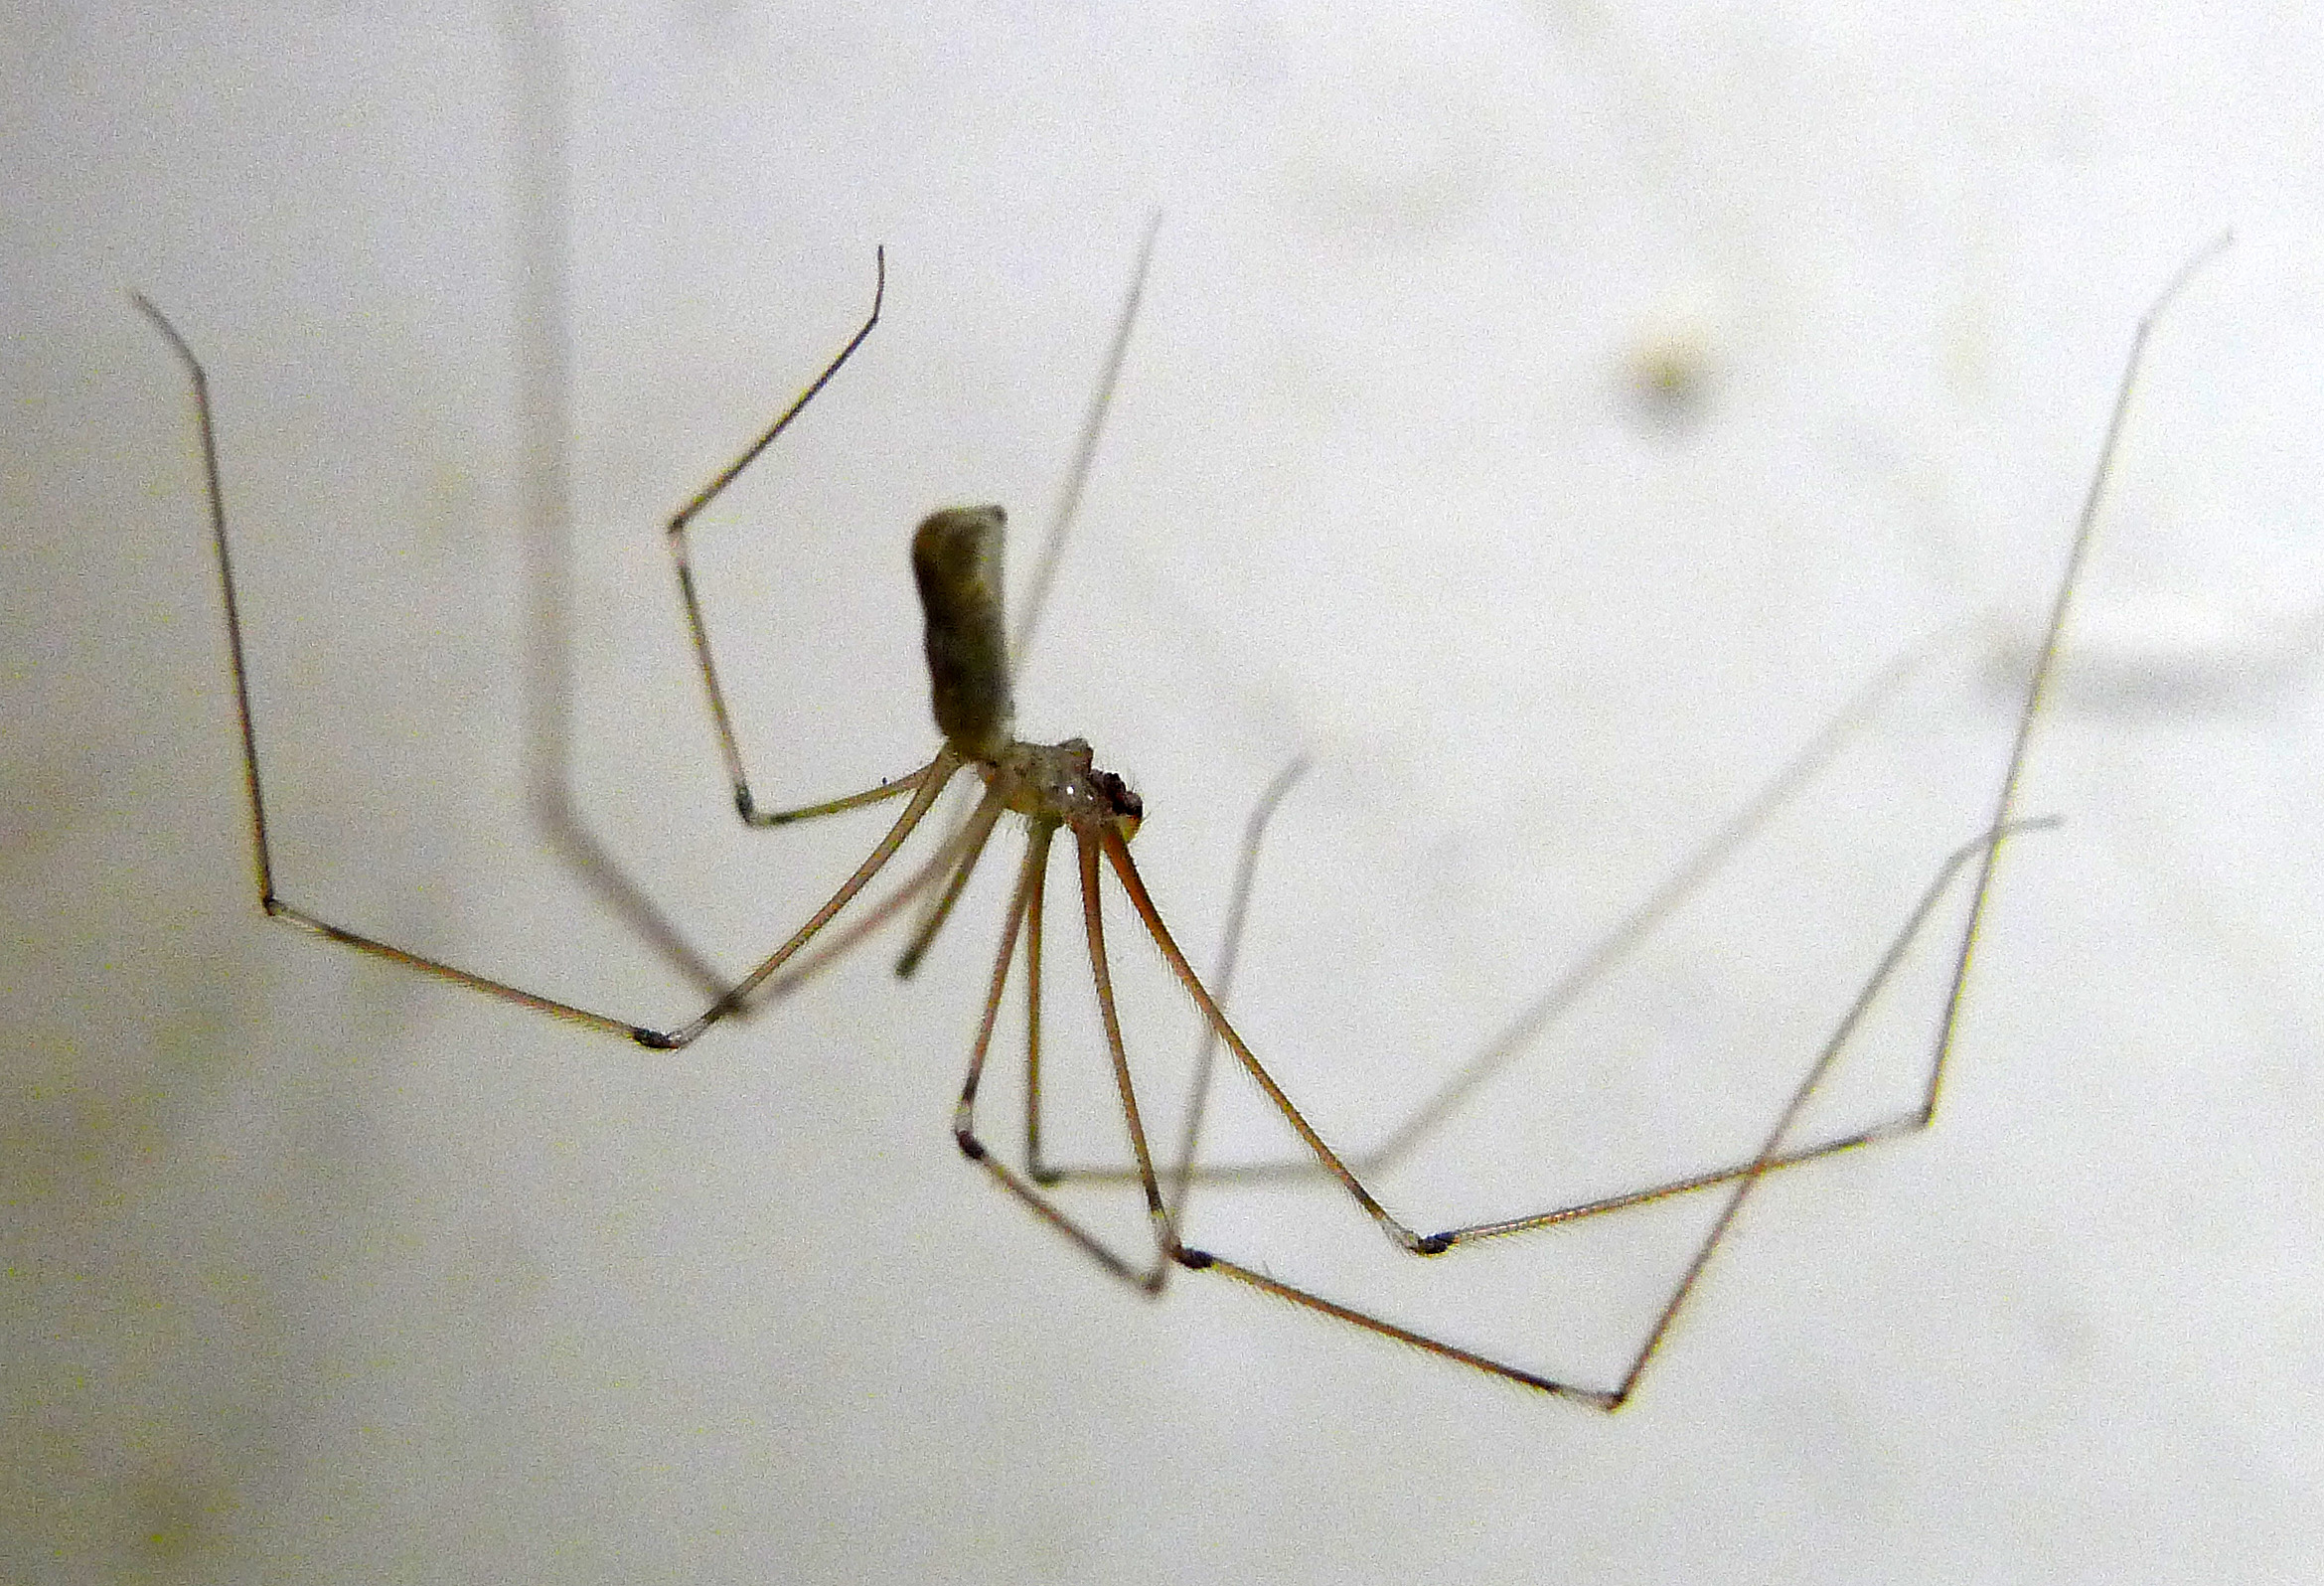 The Wildlife Information Centre - Daddy Long-legs Spider - Pholcus